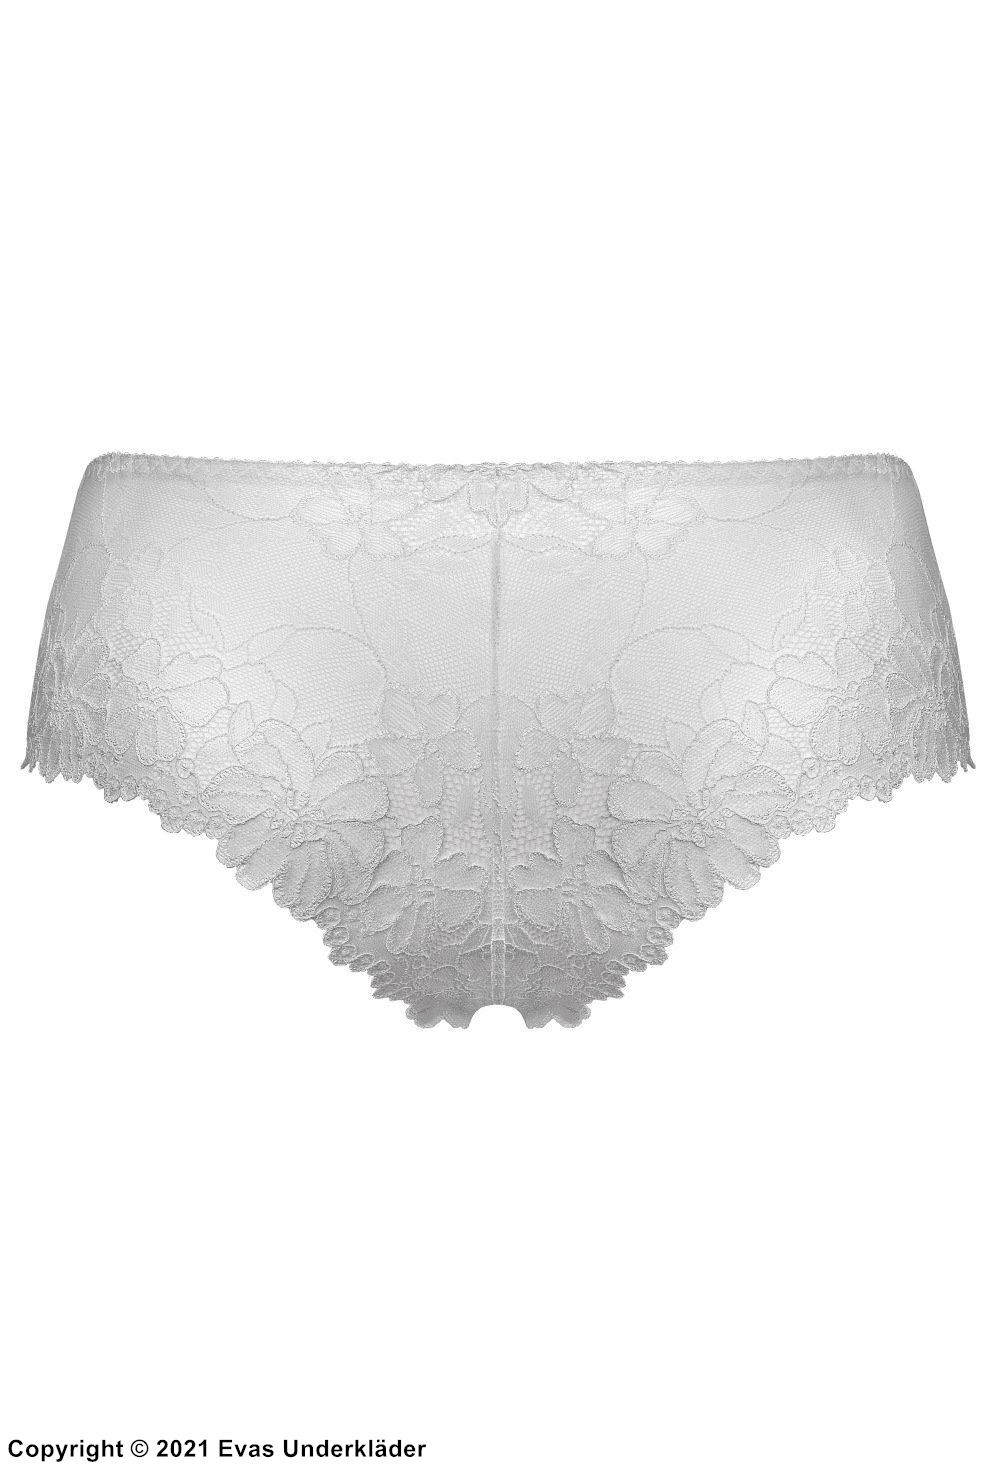 Beautiful cheeky panties, floral lace